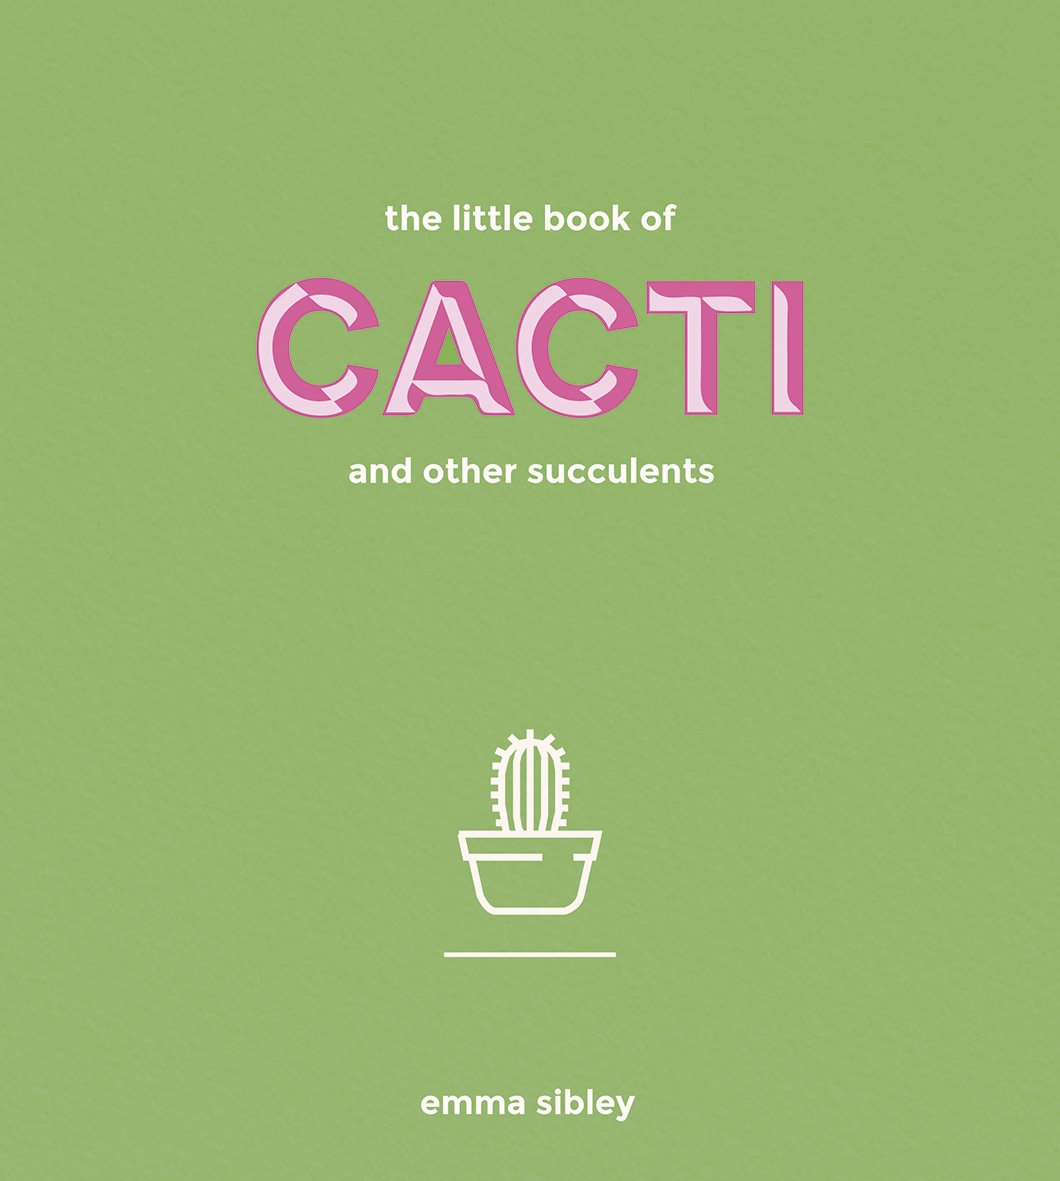 The Little Book of Cacti and Other Succulents - Emma Sibley